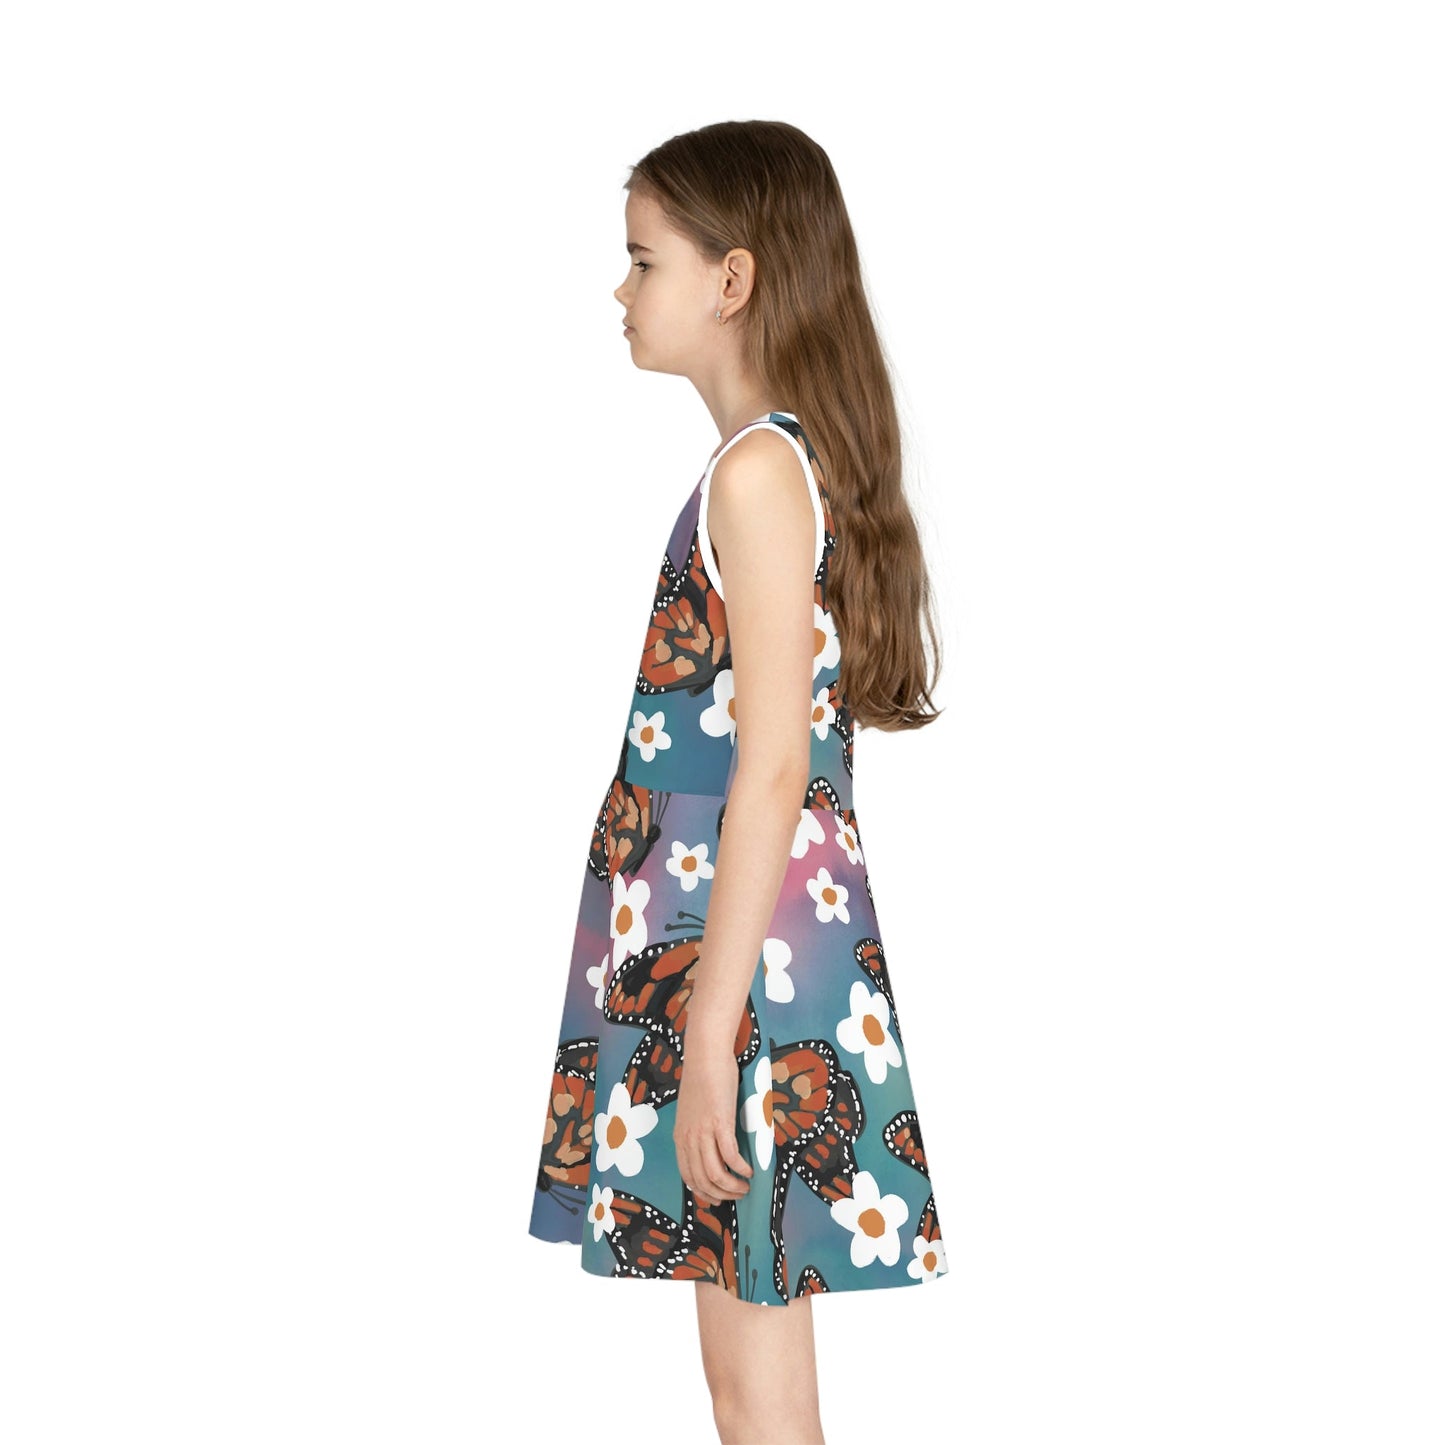 Butterfly Girls' Sleeveless Sundress All Over PrintAOPAOP Clothing#tag4##tag5##tag6#